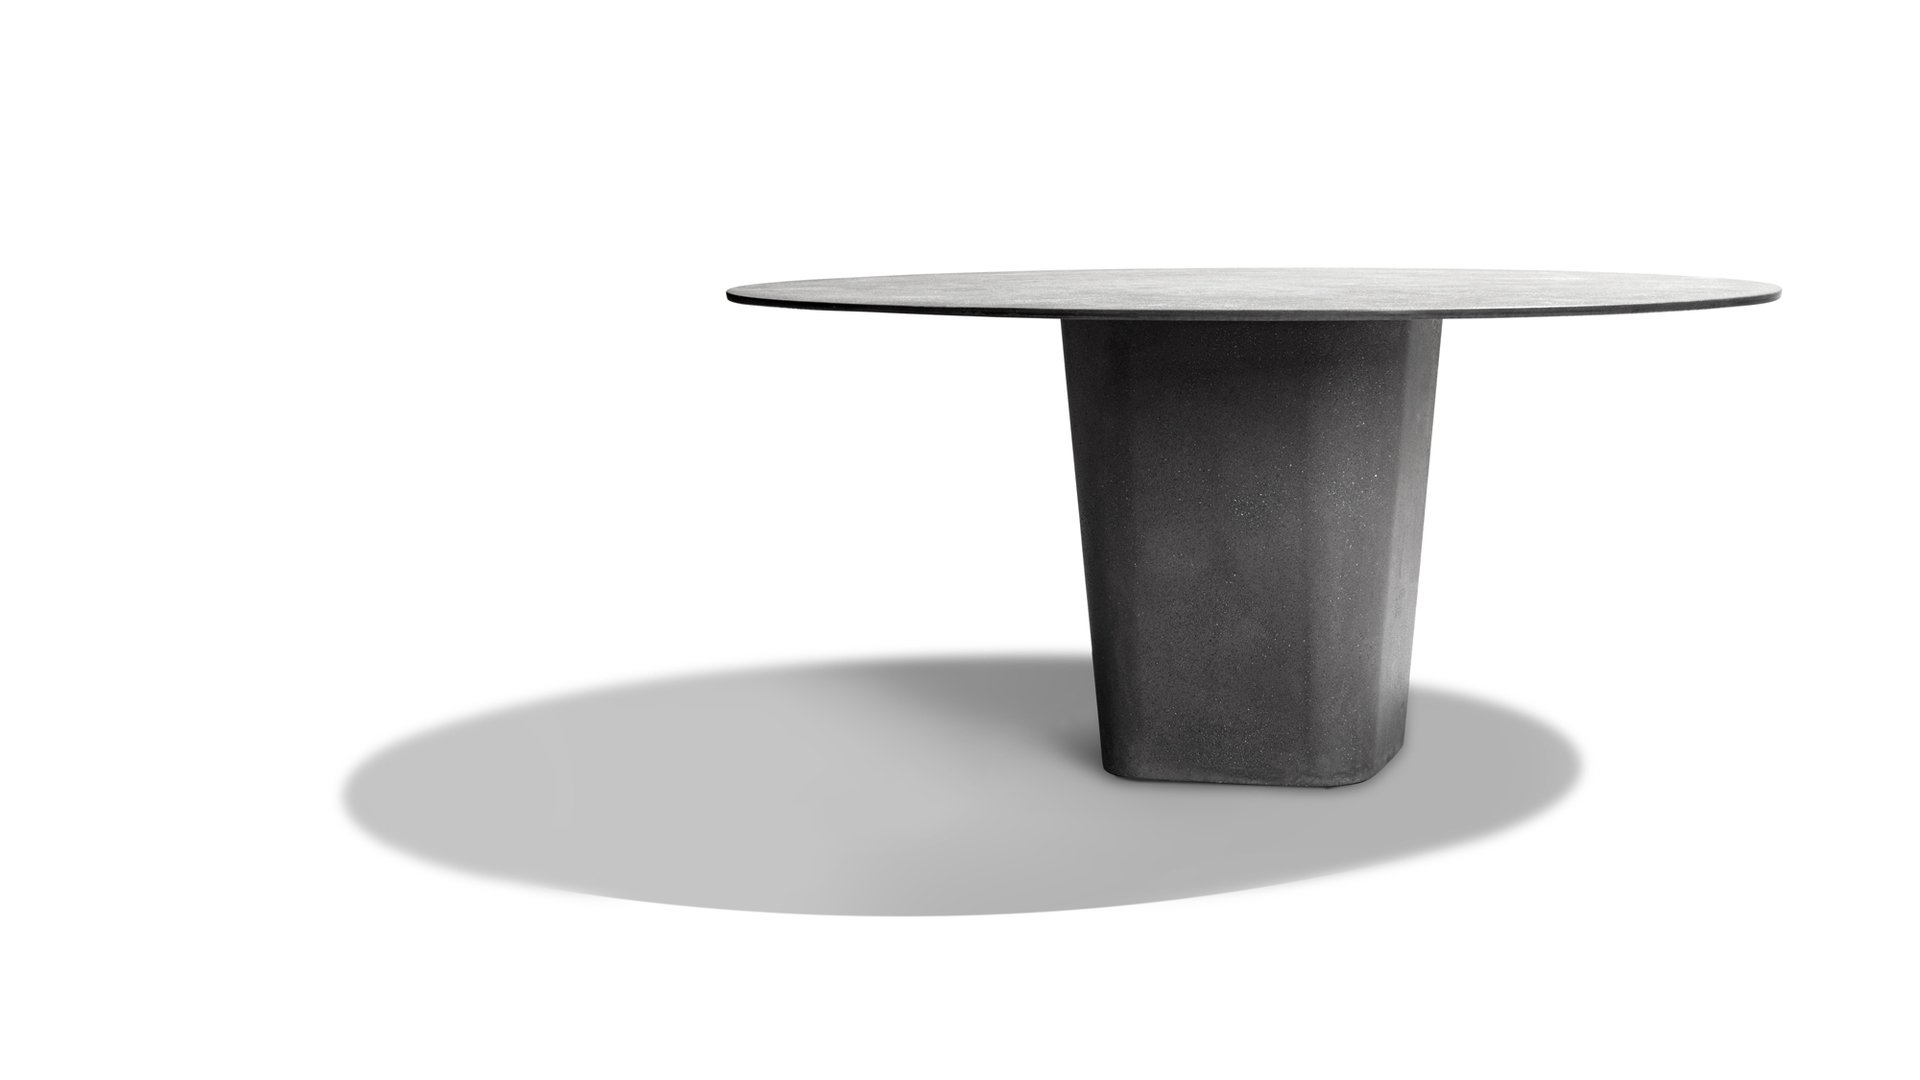 Tao-dining-table-wenge-with-shadow.jpg